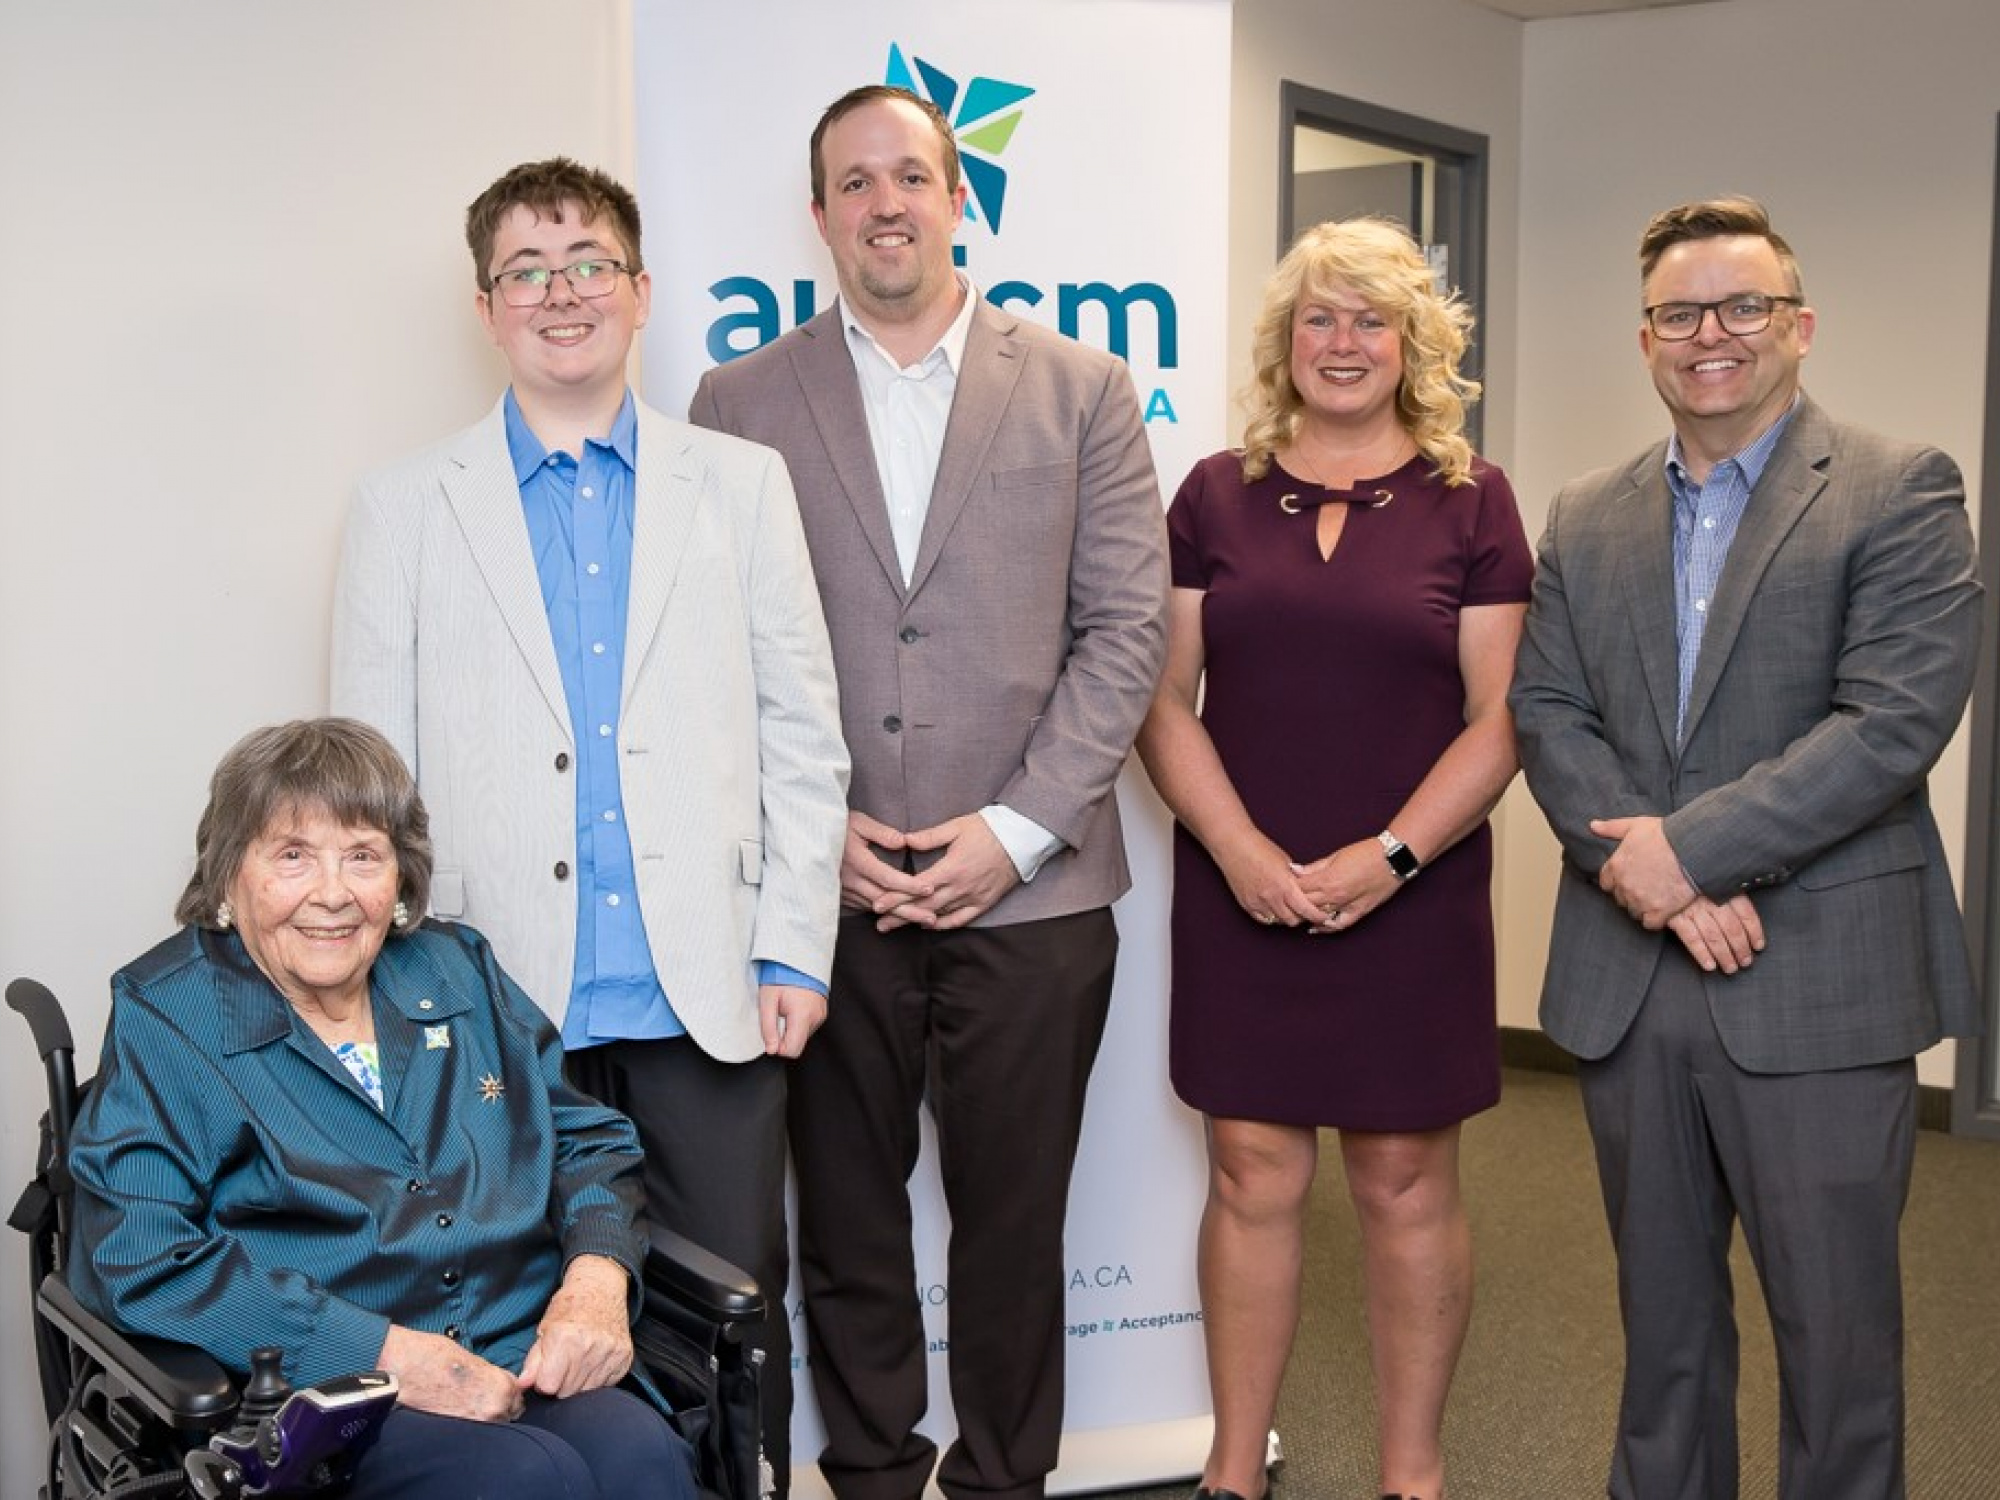 Photo of Joan Craig, founder of Autism Nova Scotia; Ethan Rekunyk, who has autism and is an advocate; Brian Comer, Minister of Addictions and Mental Health; Cynthia Carroll, Executive Director, Autism Nova Scotia; and Brendan Maguire, Minister of Community Services